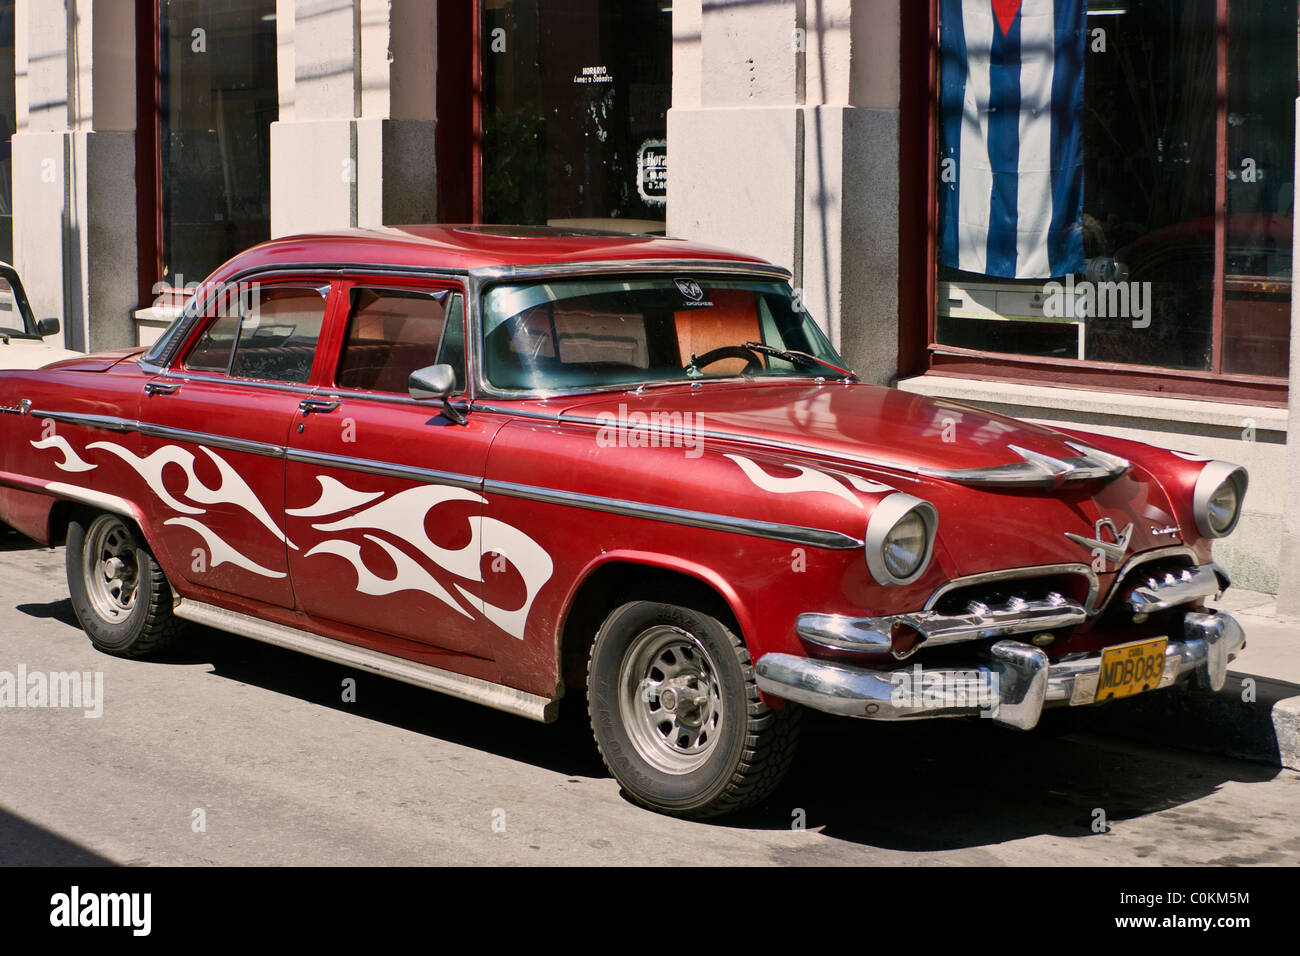 What makes Cuba famous? Beutifully restored American cars Stock Photo